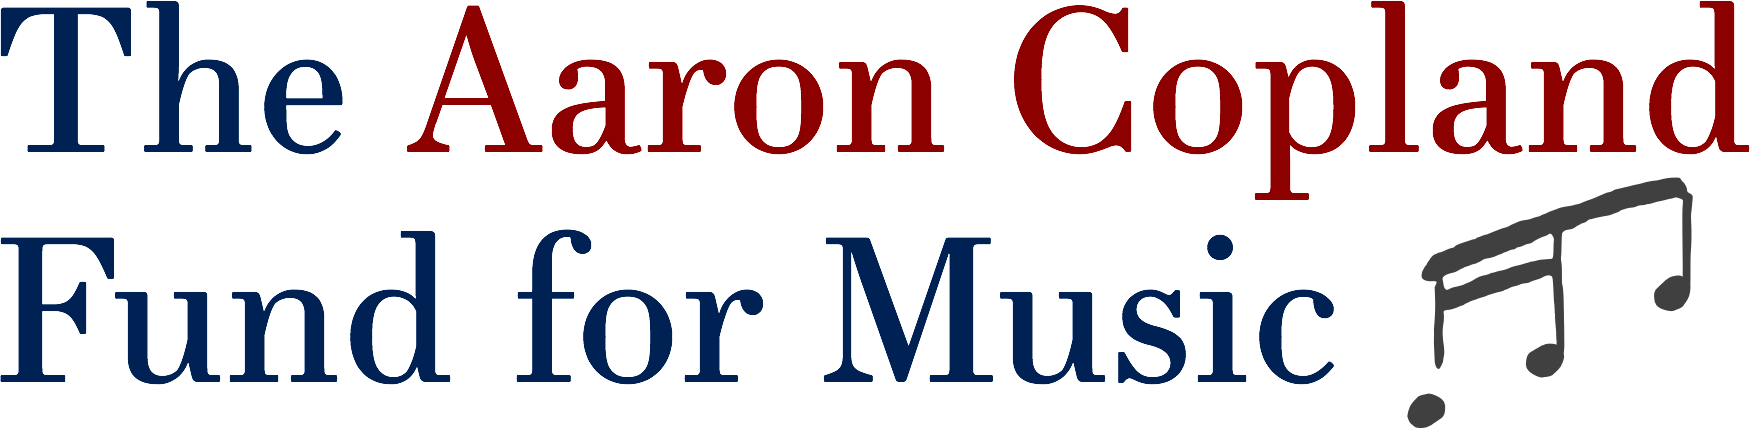 The Aaron Copland Fund for Music